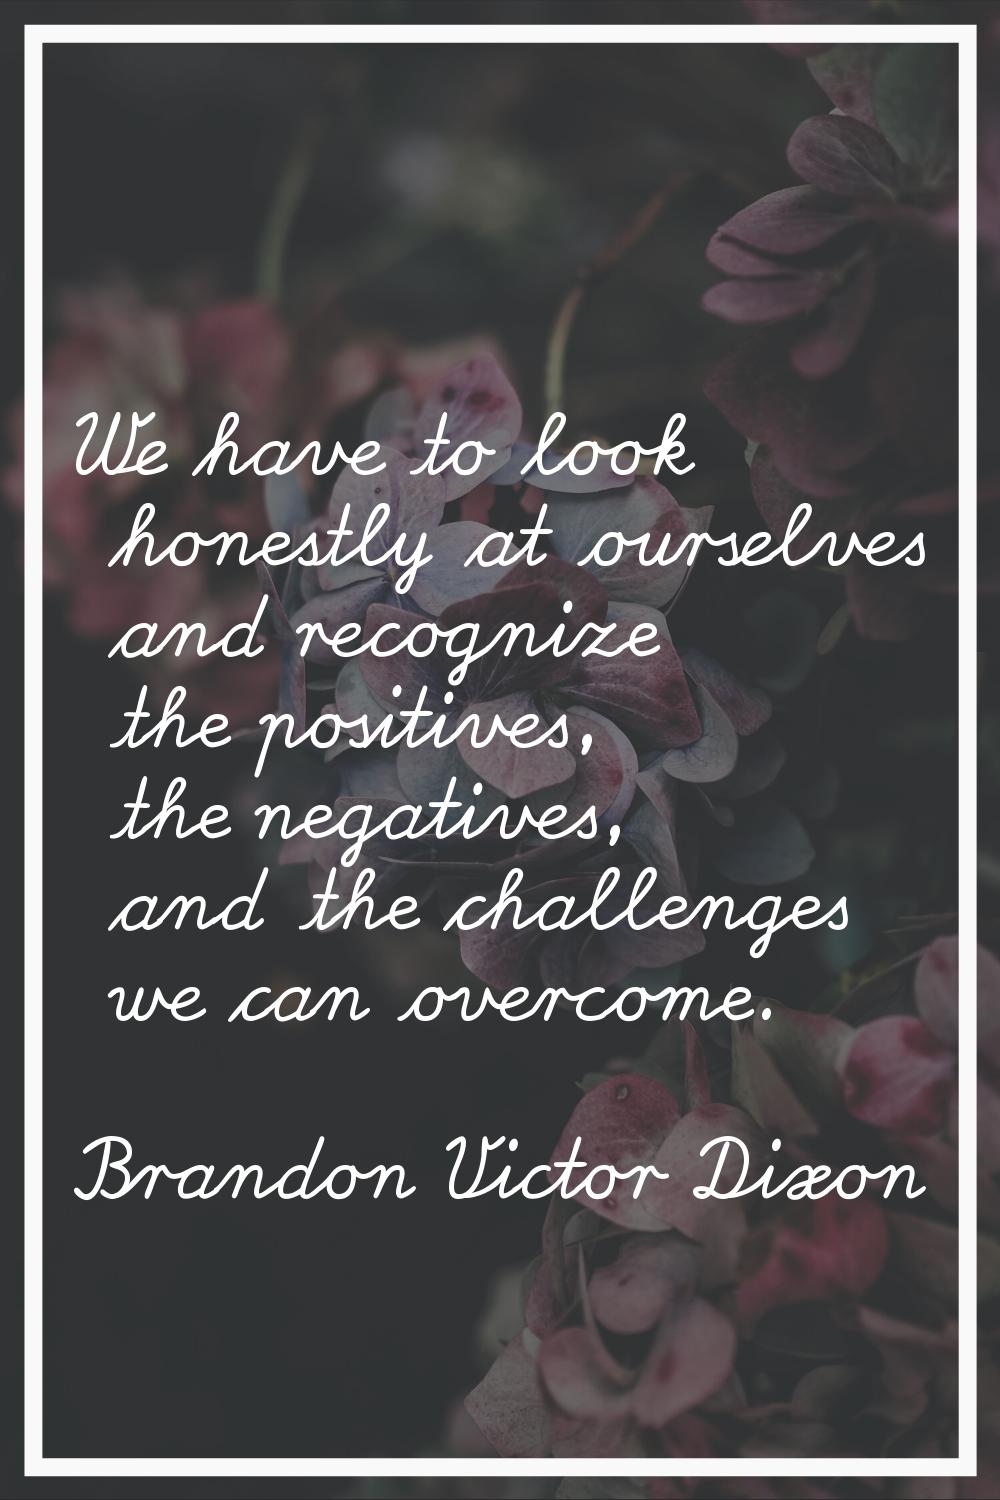 We have to look honestly at ourselves and recognize the positives, the negatives, and the challenge